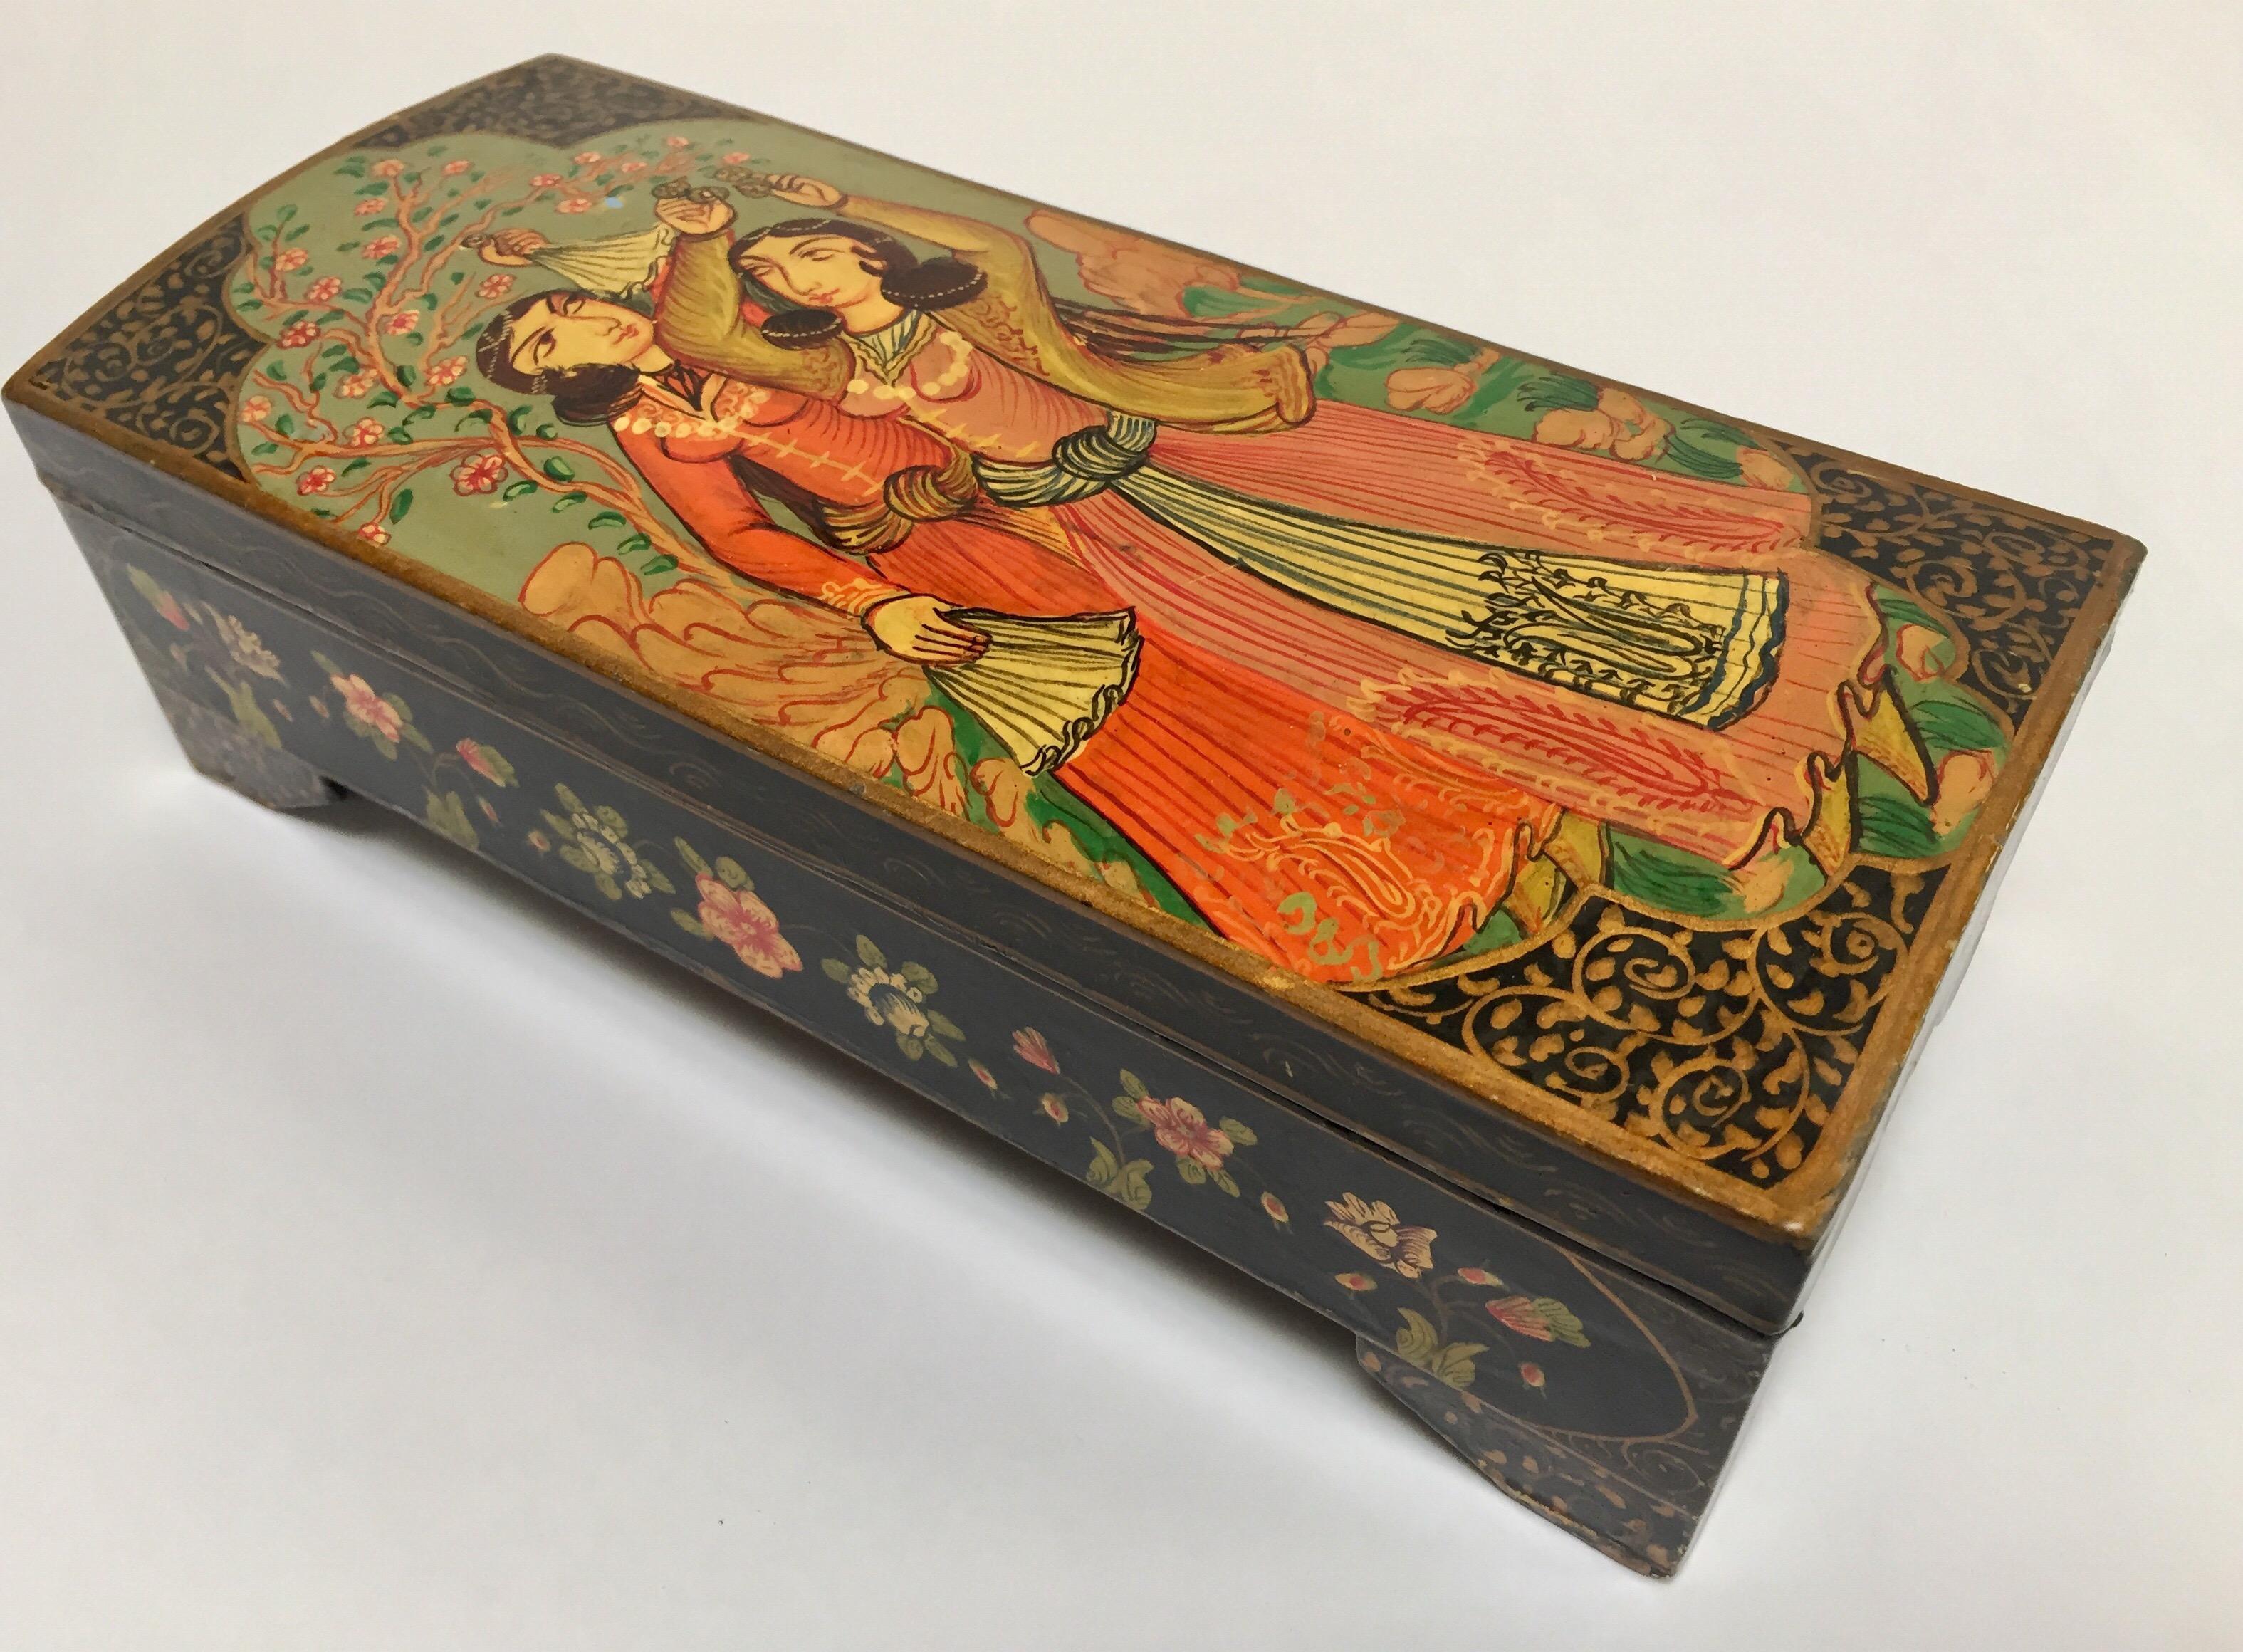 Islamic Lacquer Pen Box Hand Painted with Harem Girls Playing and Dancing